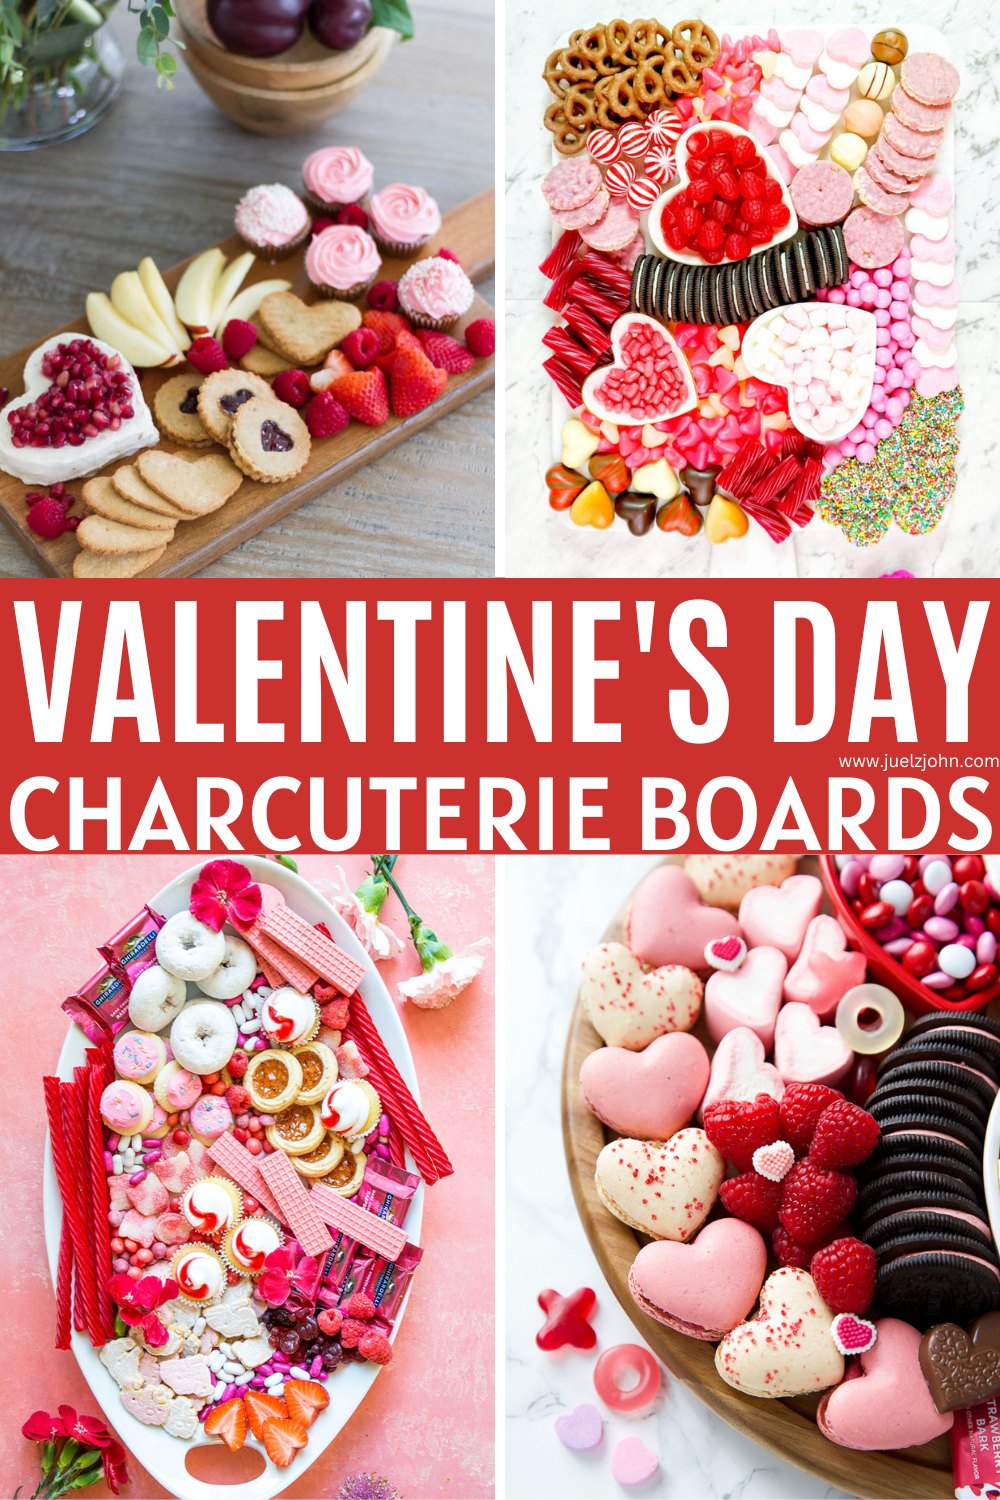 Valentines charcuterie boards